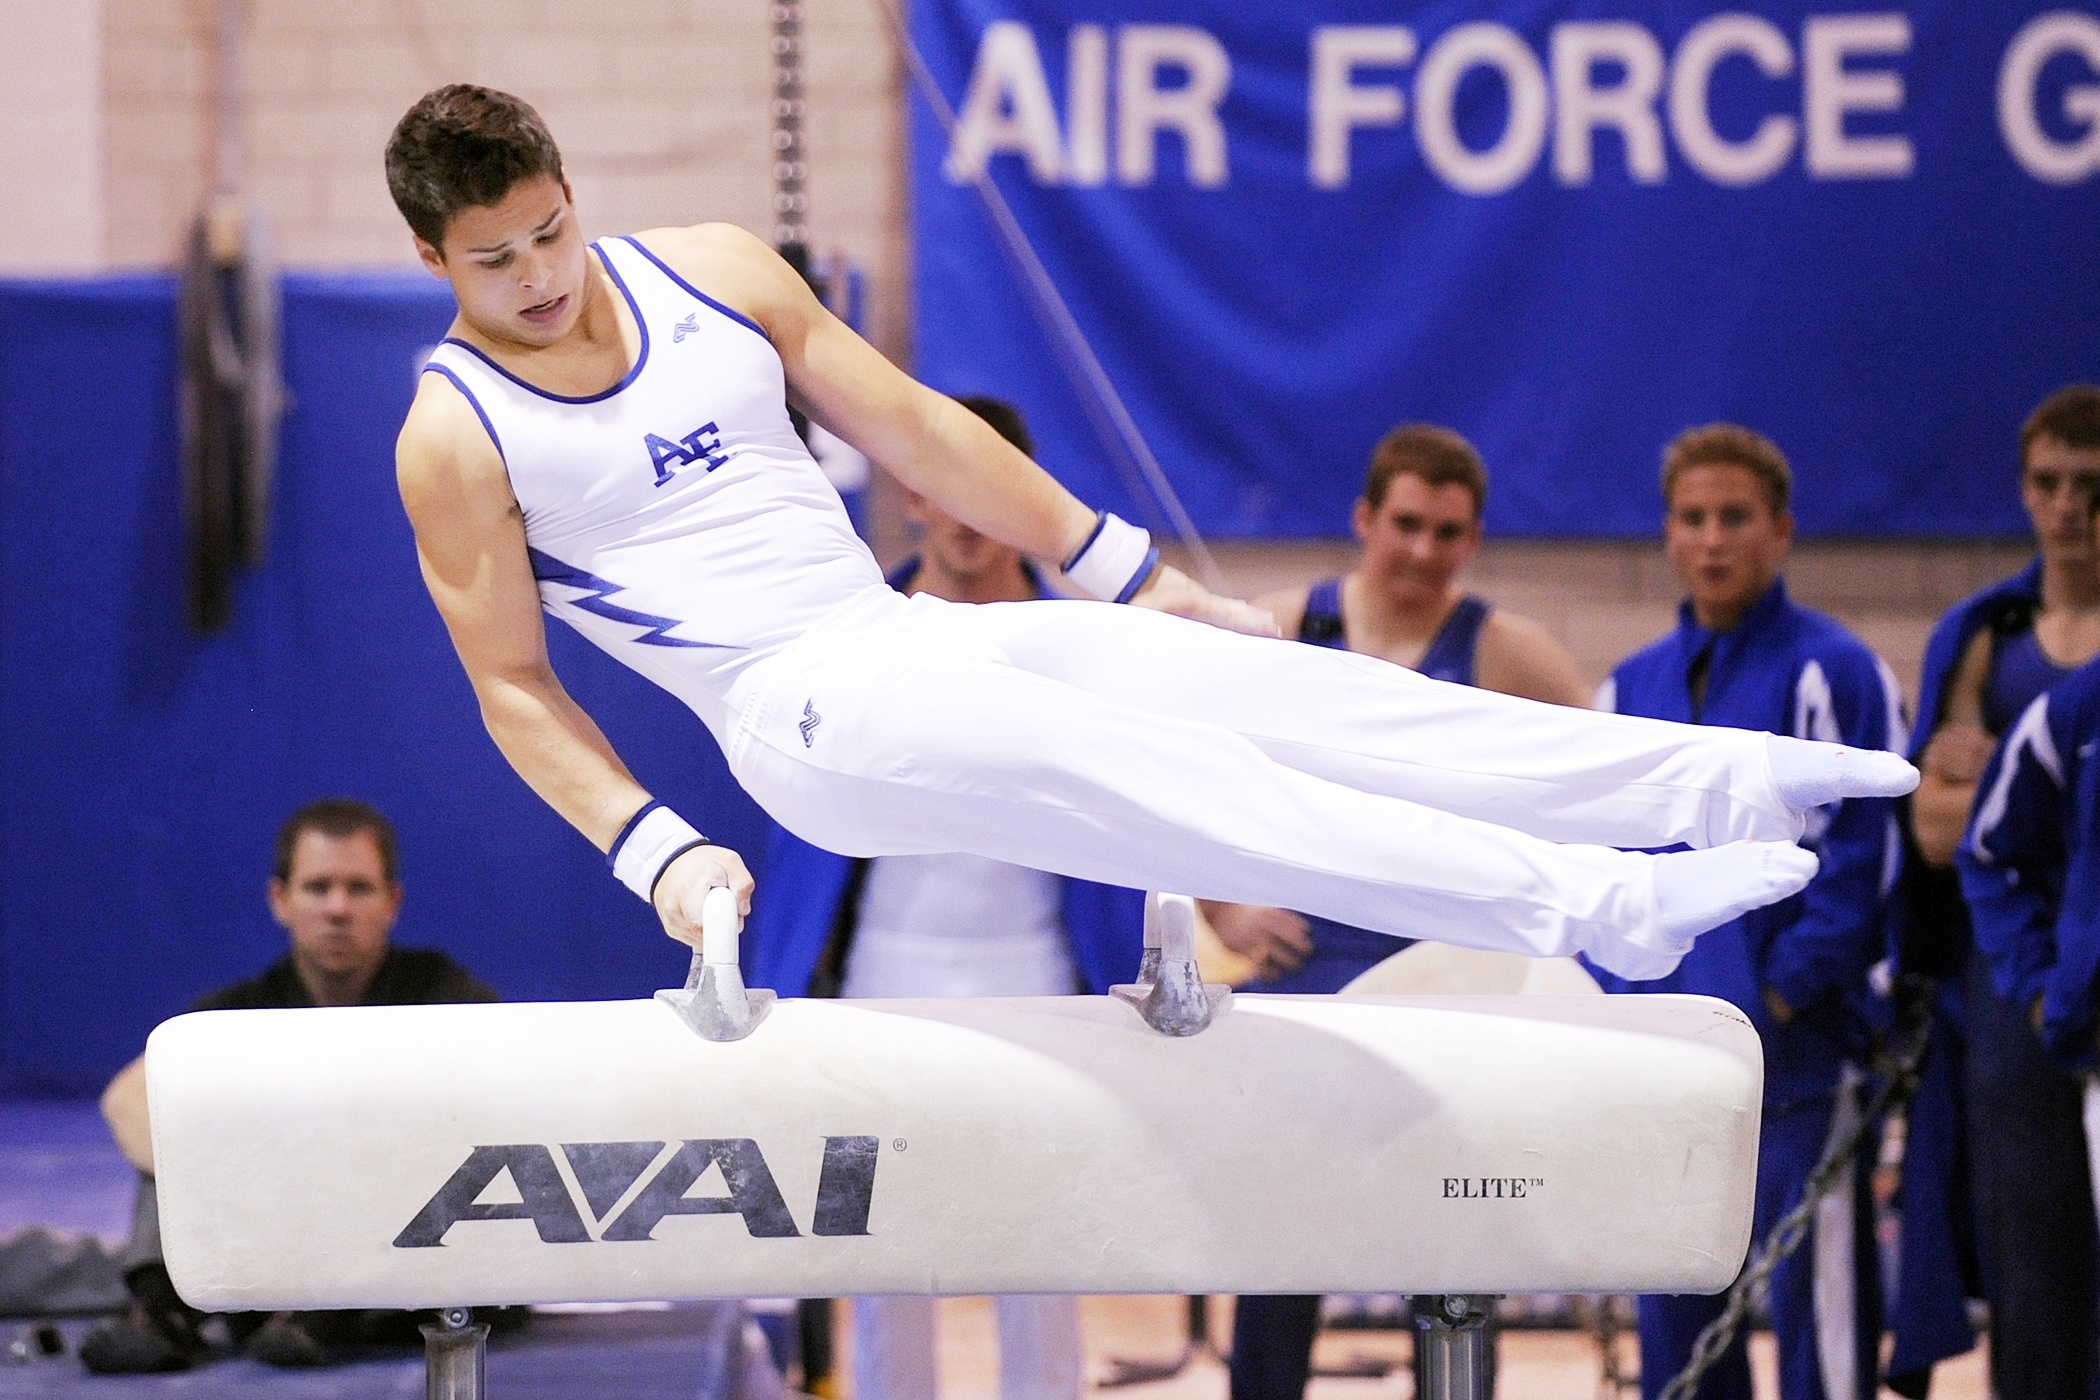 Acrobatic Gymnastics: Men's competitive event at the US Air Force Olympic Qualifications. 2100x1400 HD Background.